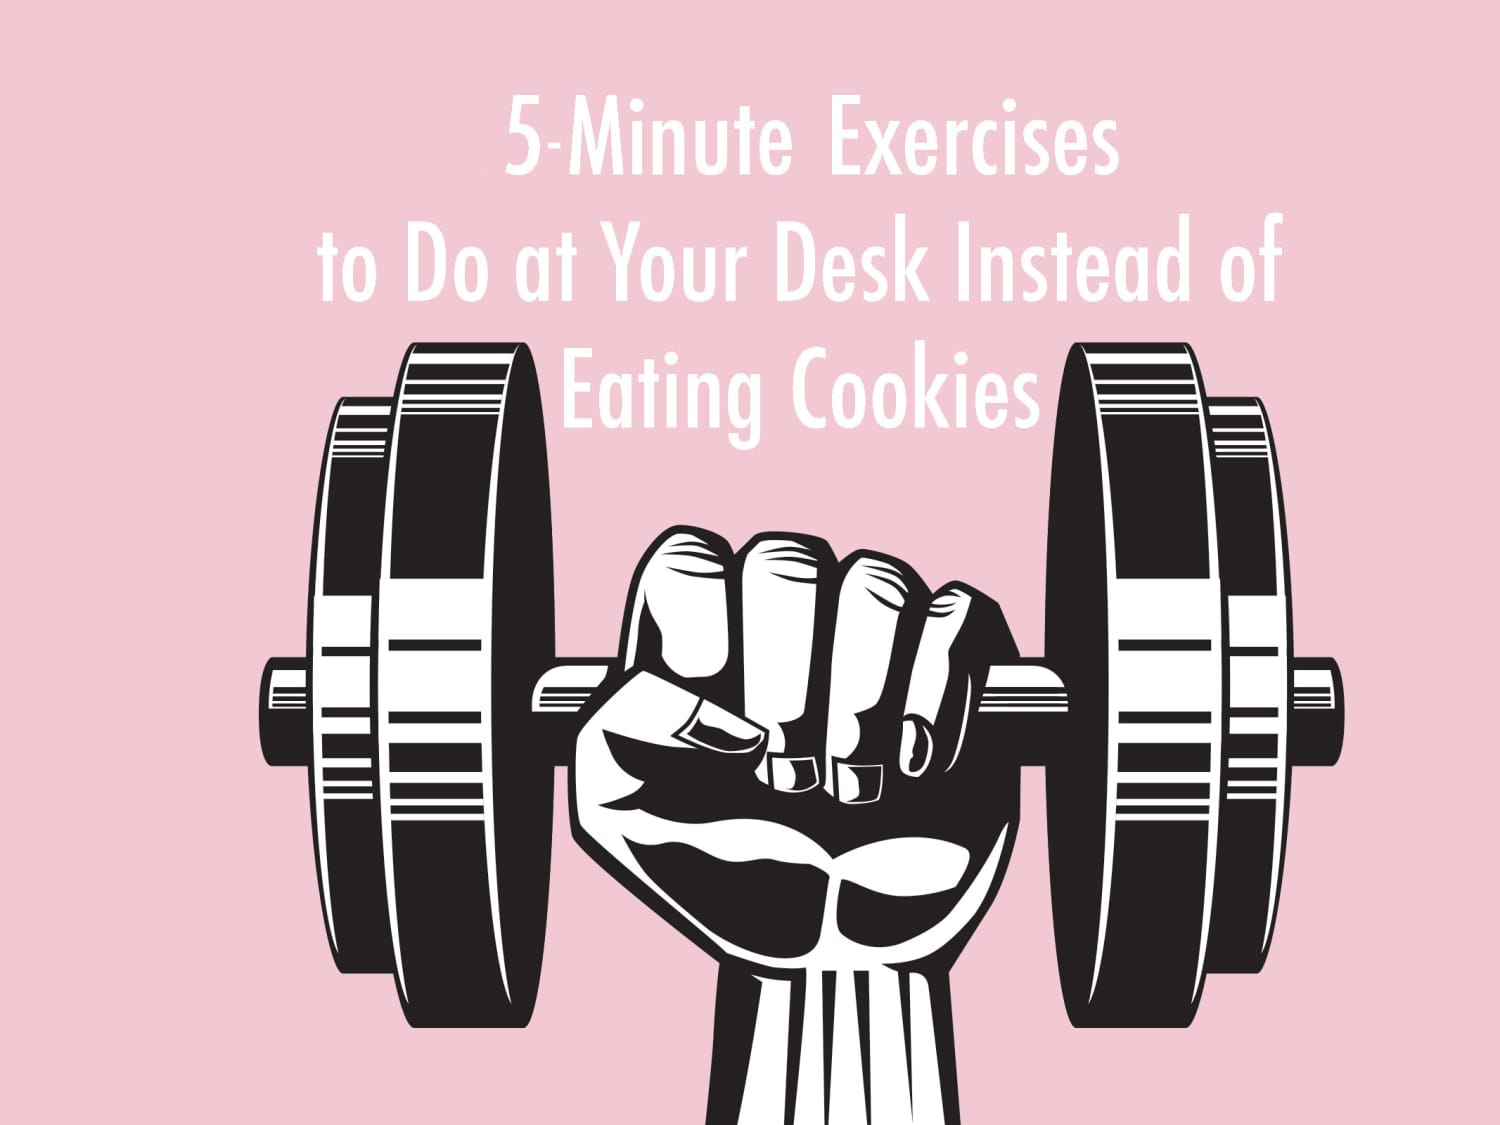 3 Exercises To Do At Your Desk